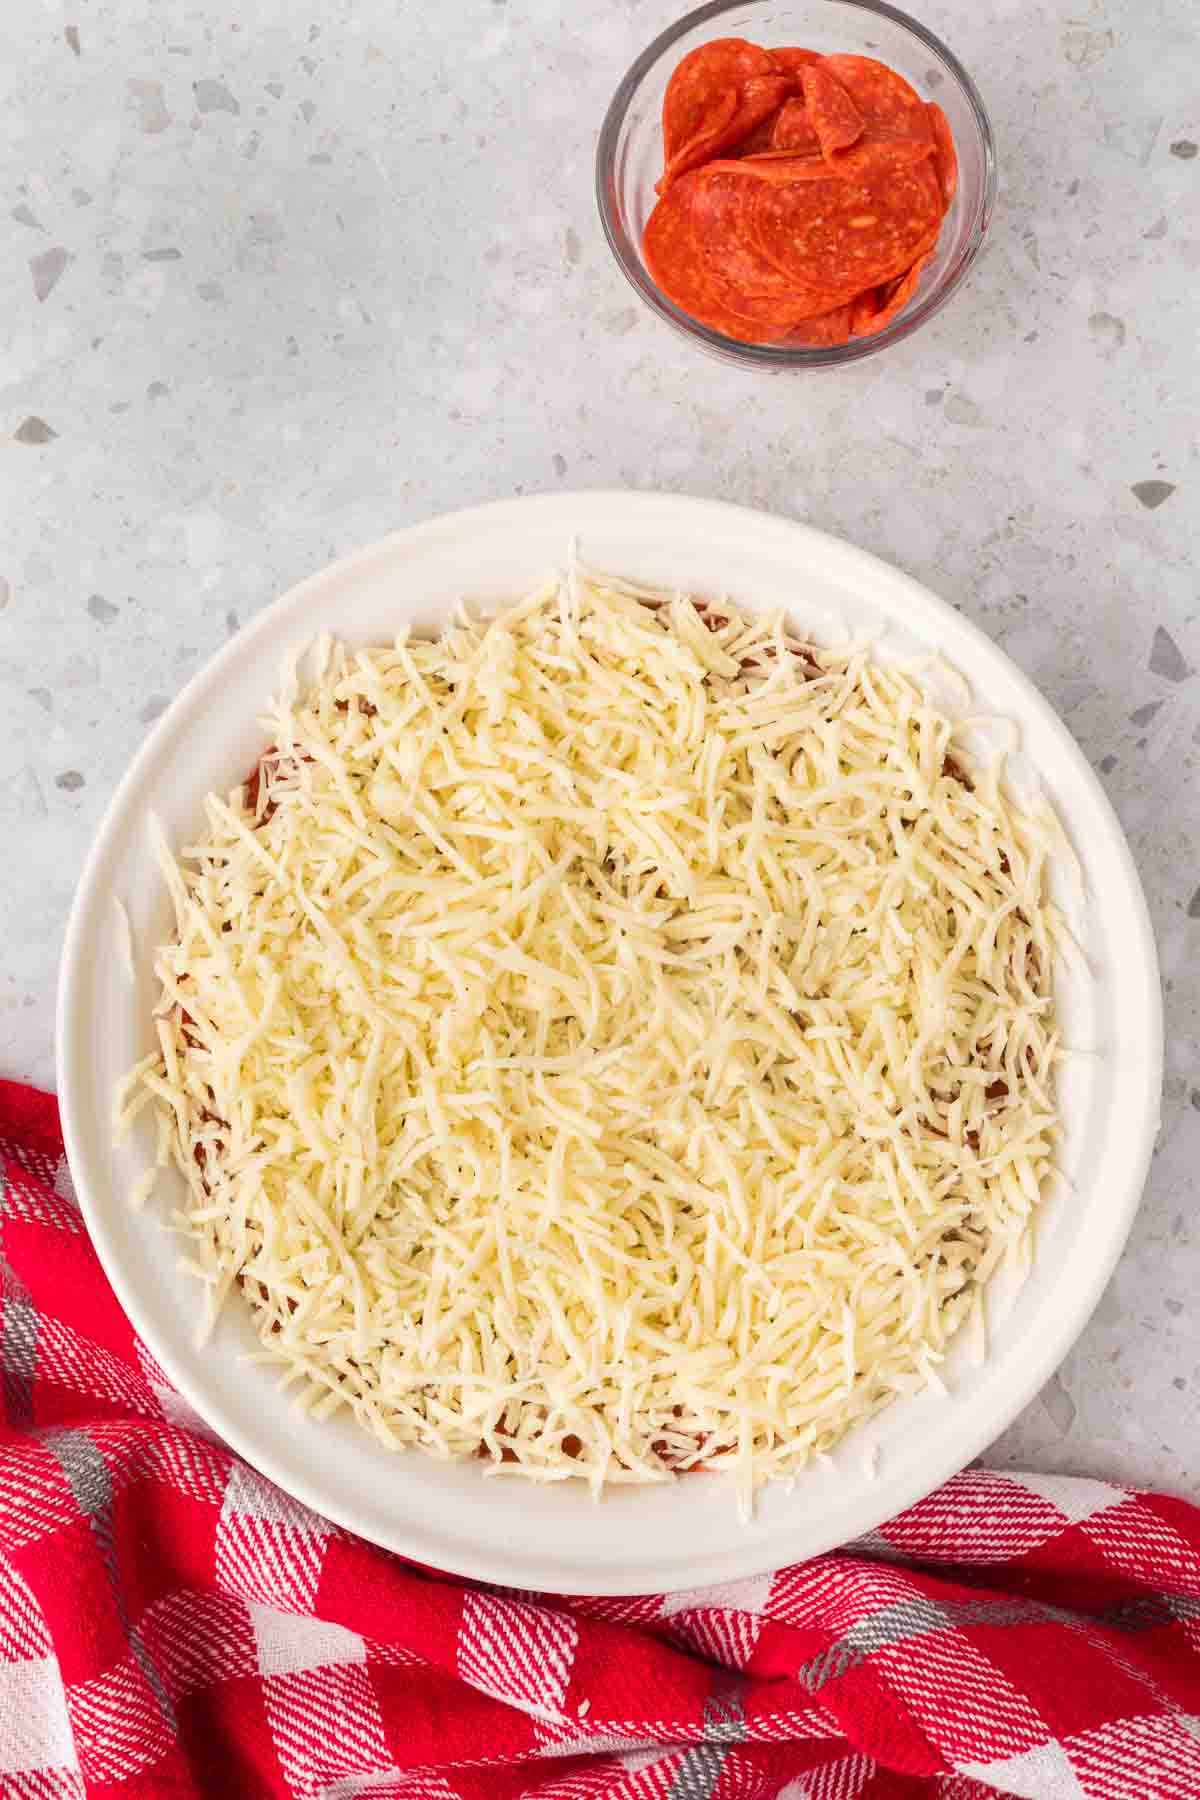 Topping with shredded cheese and pizza sauce